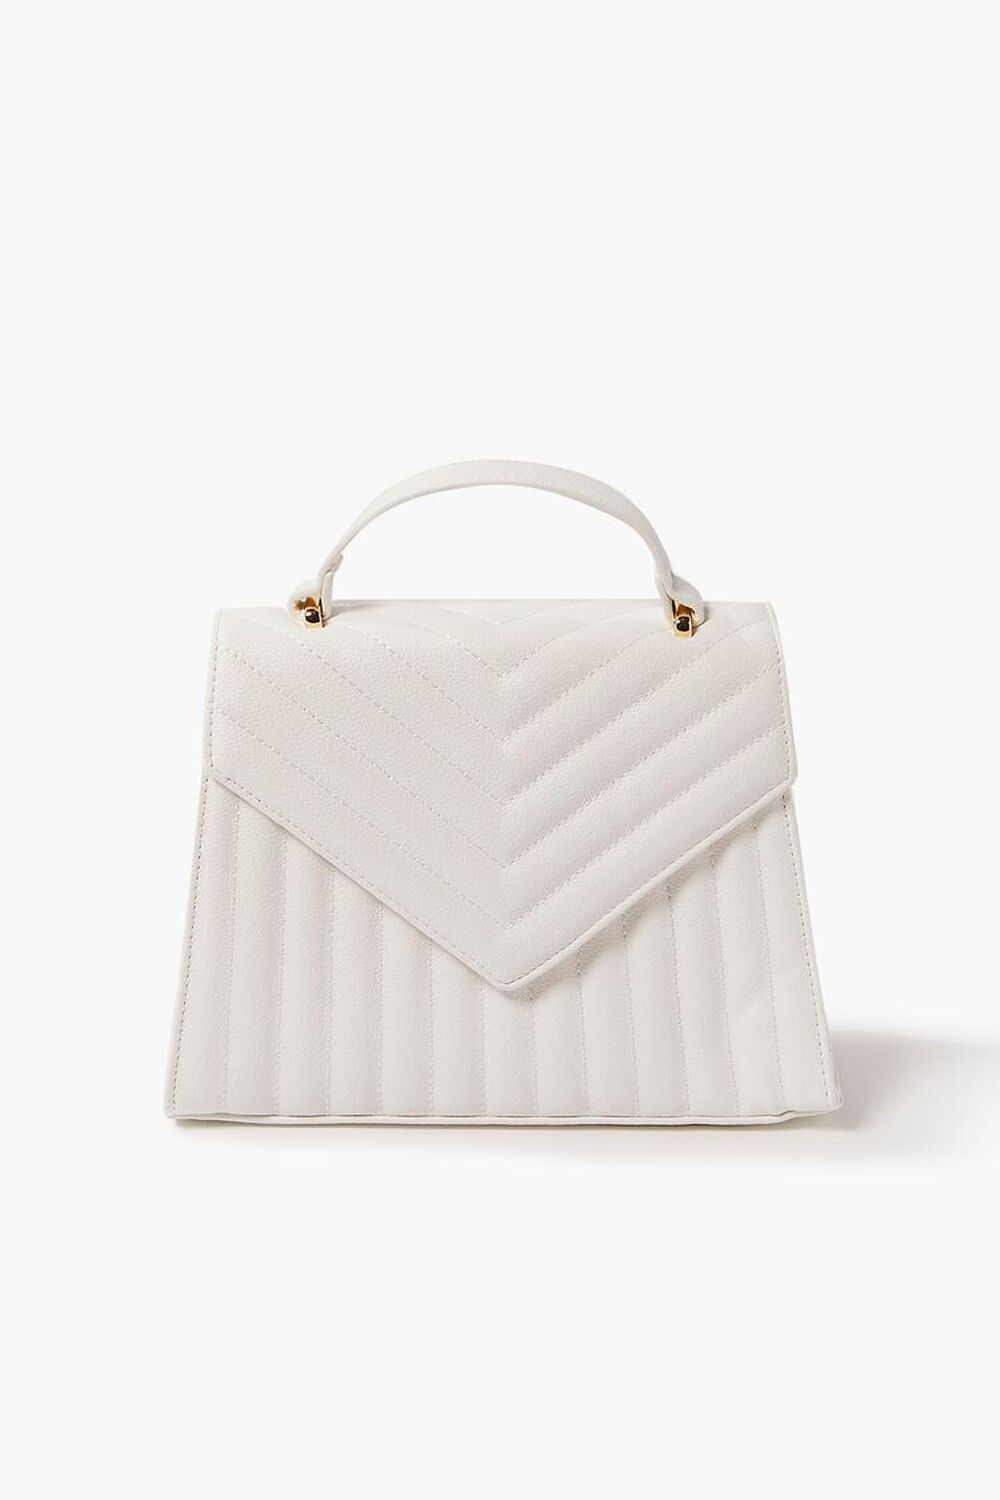 WHITE Quilted Chevron Faux Leather Satchel, image 1